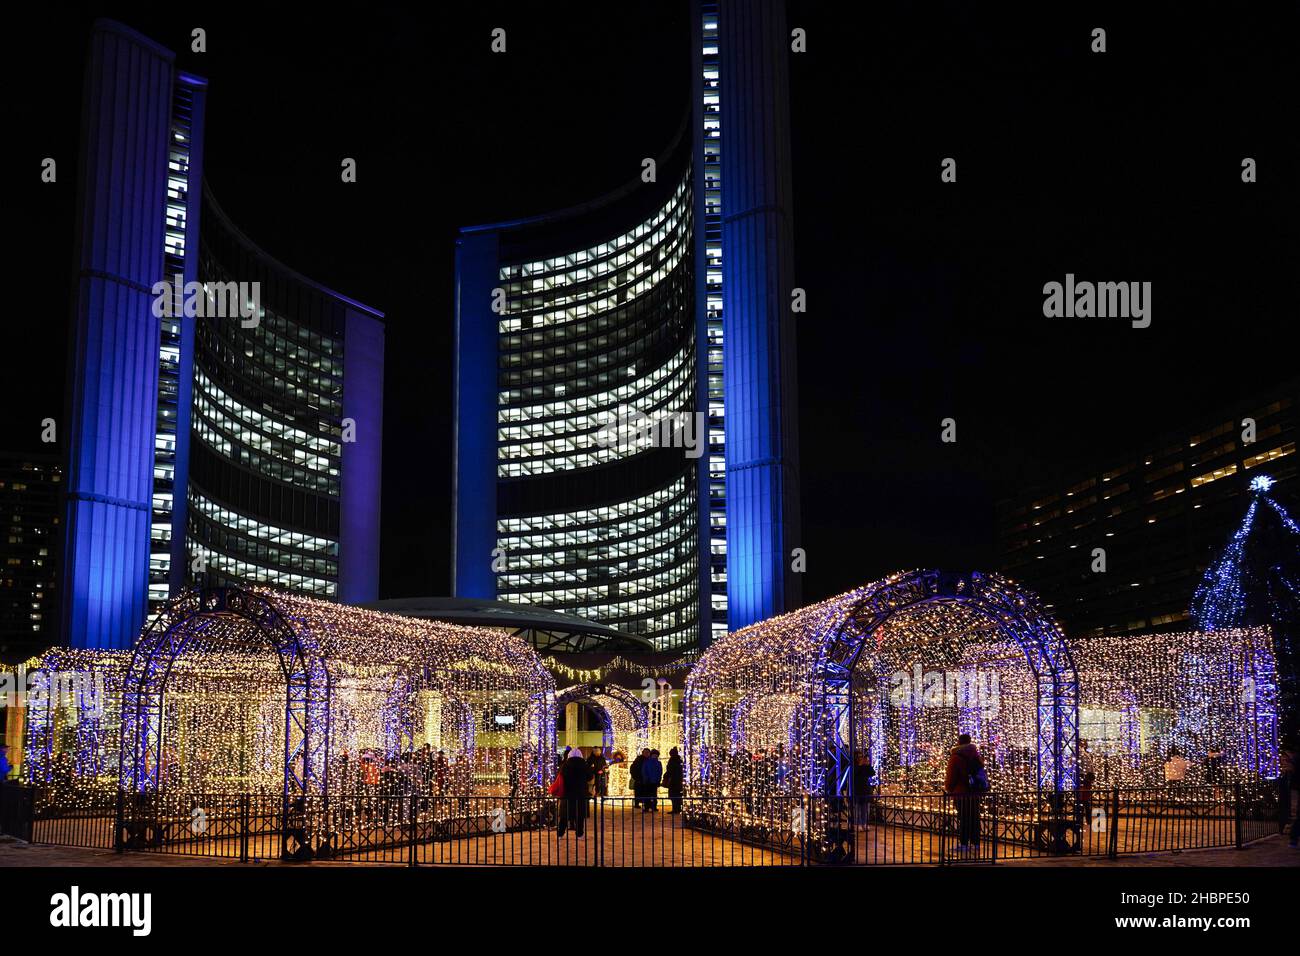 Toronto, Canada - December 20, 2021:  Toronto City Hall square is lit up with bright lights every year for the Christmas season. Stock Photo